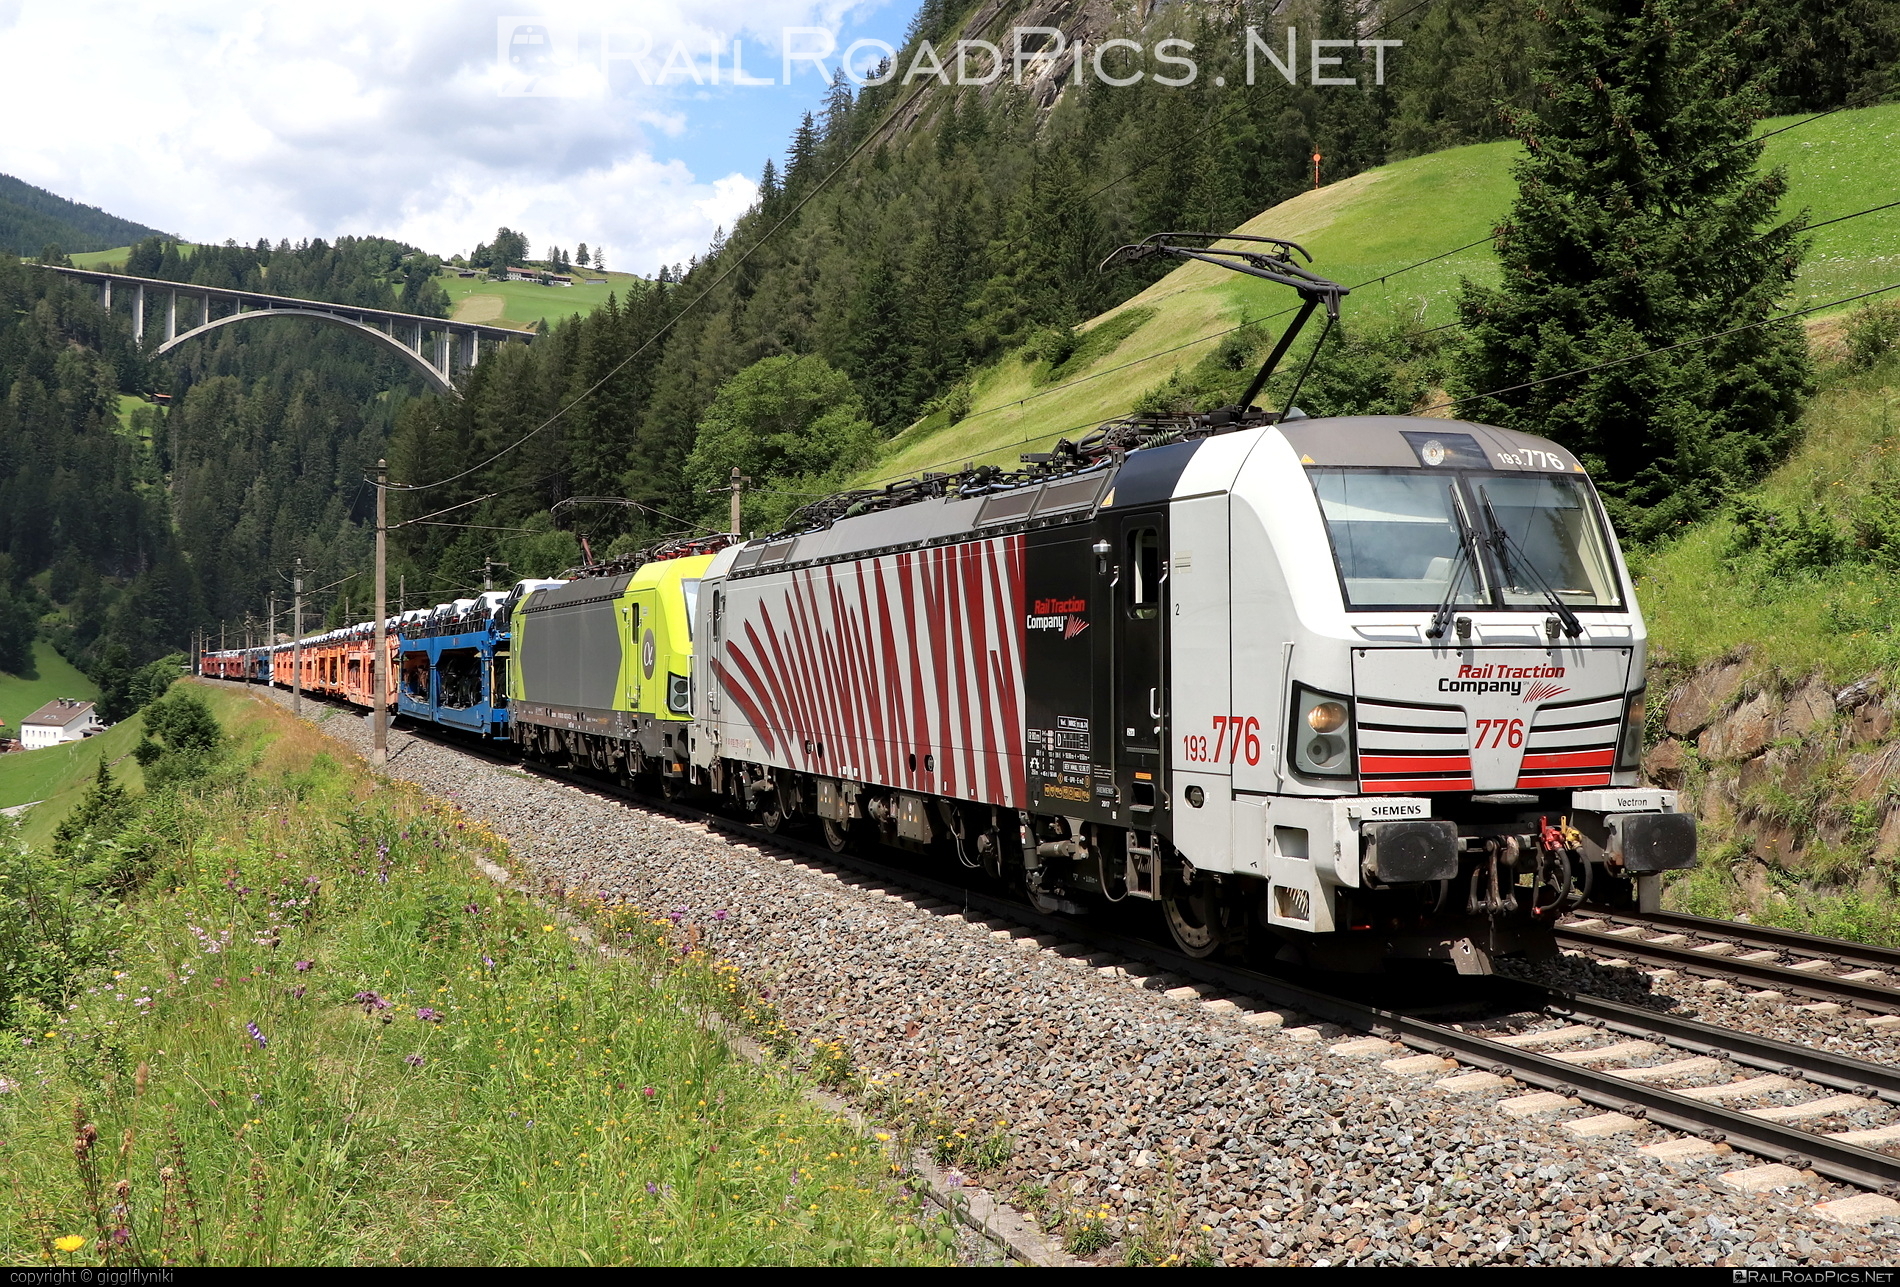 Siemens Vectron MS - 193 776 operated by Rail Traction Company #LokomotionGesellschaftFurSchienentraktion #RailTractionCompany #carcarrierwagon #lokomotion #rtc #siemens #siemensVectron #siemensVectronMS #vectron #vectronMS